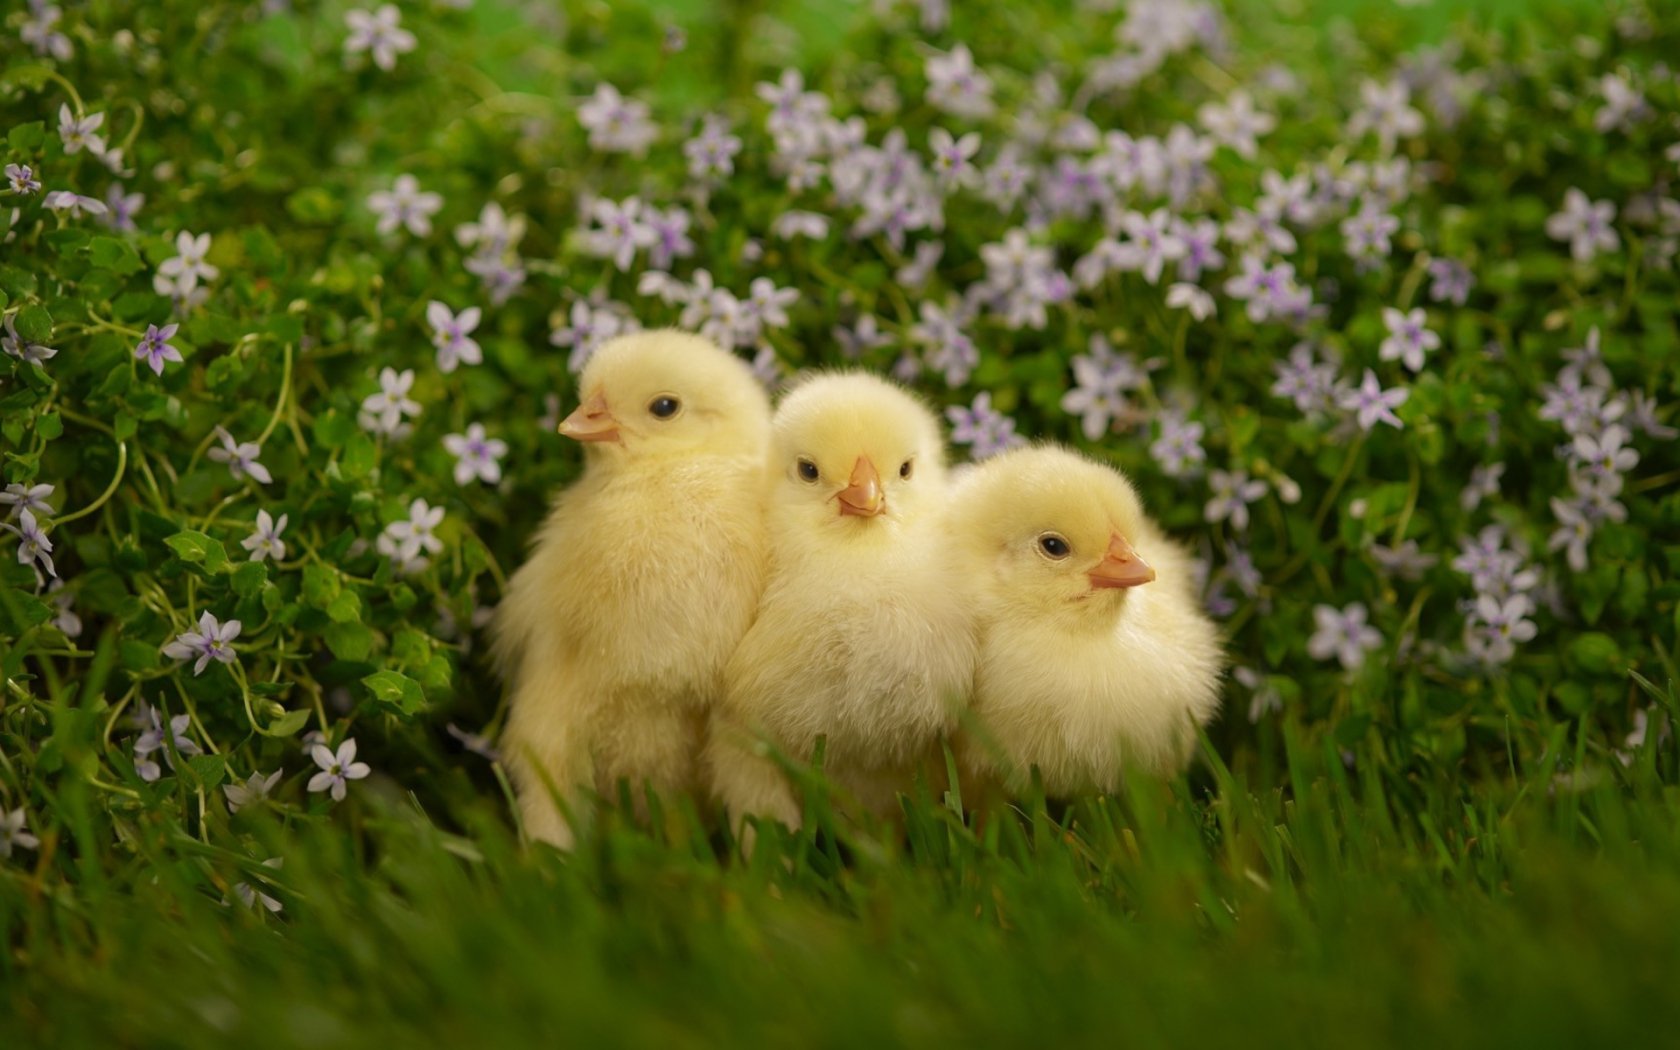 Free download Three cute Chicks HD Wallpaper Background Image 1920x1200 [1920x1200] for your Desktop, Mobile & Tablet. Explore Cute Chickens Wallpaper. Baby Chickens Wallpaper, Wallpaper with Chickens, Wallpaper Border with Chickens